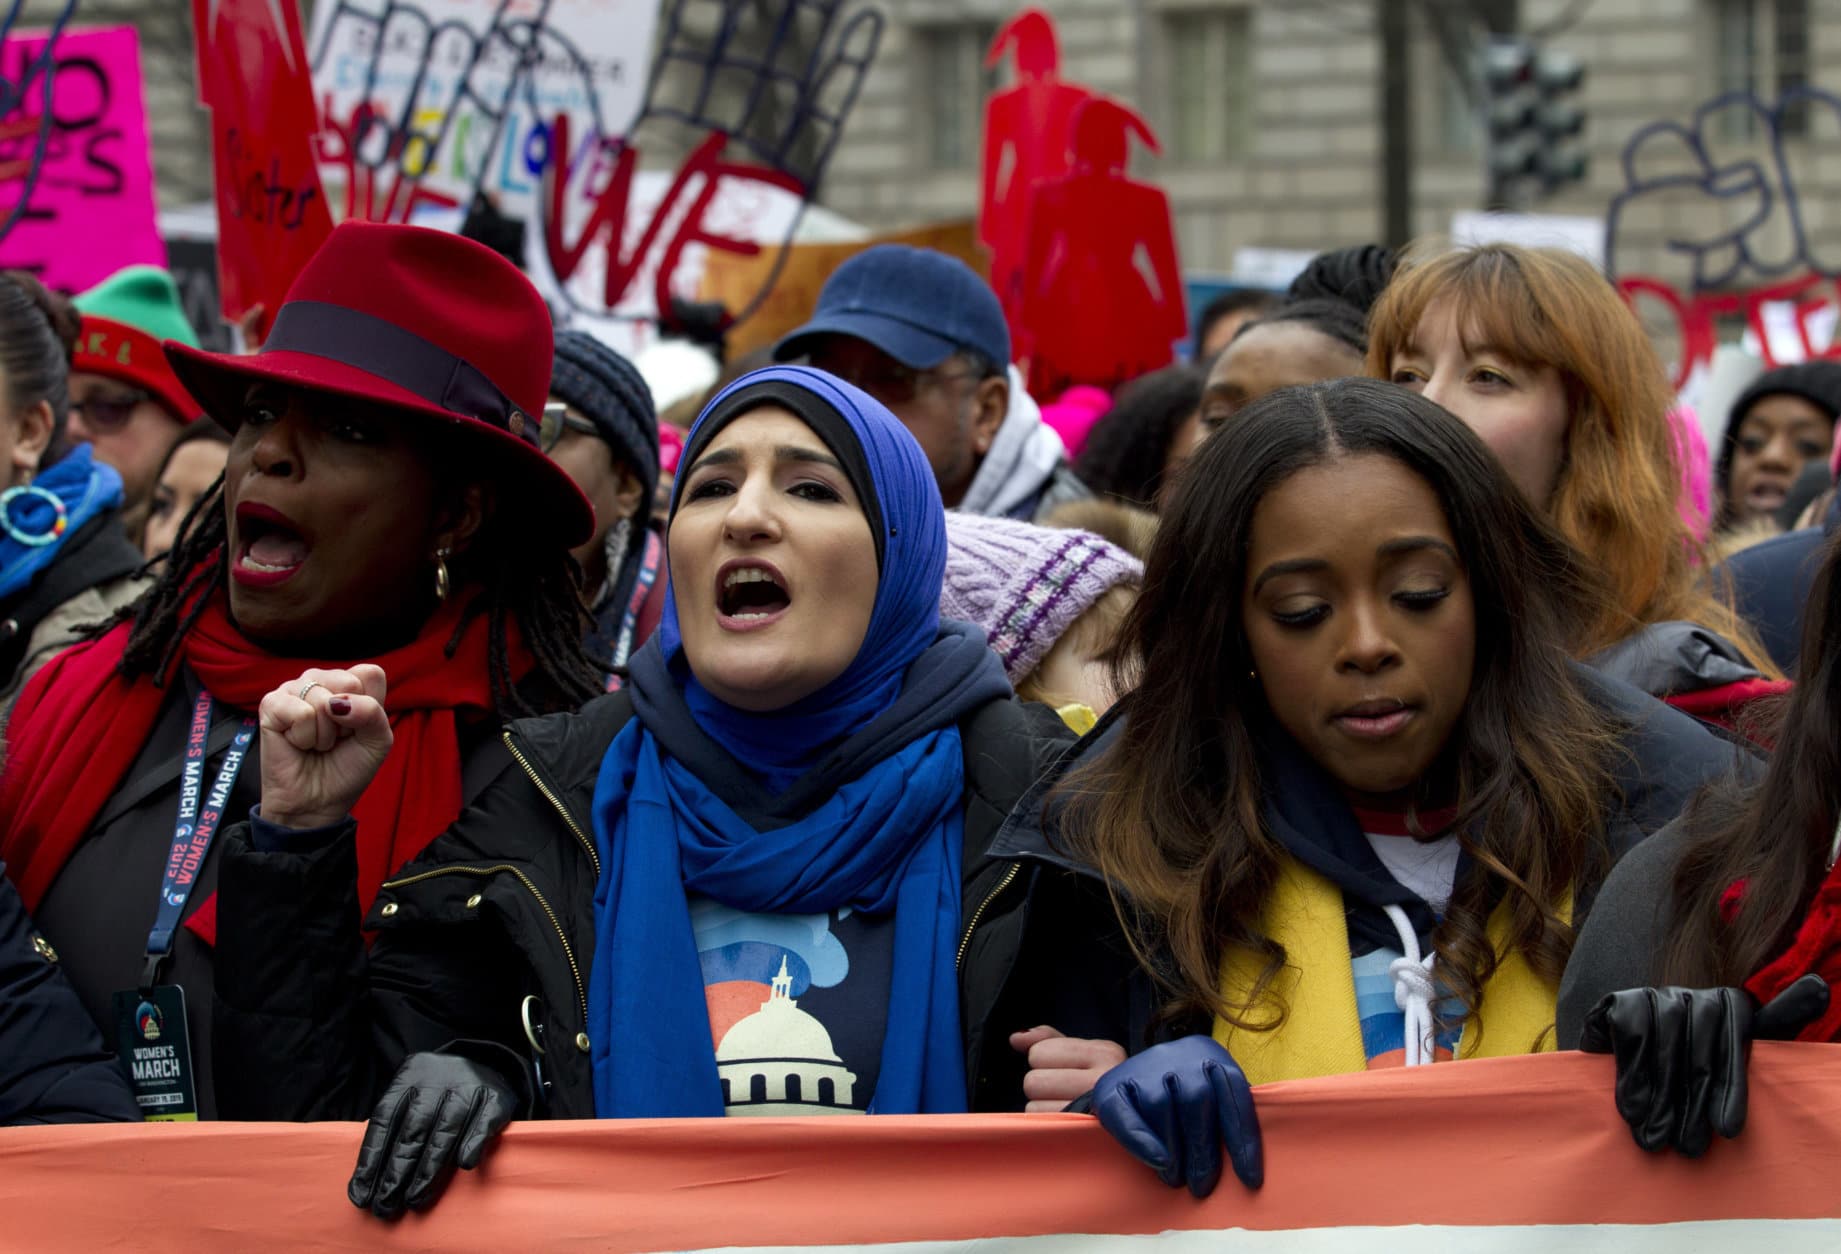 Co-presidents of the 2019 Women's March, Linda Sarsour, center, and Tamika Mallory, right, join other demonstrators on Pennsylvania Avenue during the Women's March in Washington on Saturday, Jan. 19, 2019. (AP Photo/Jose Luis Magana)